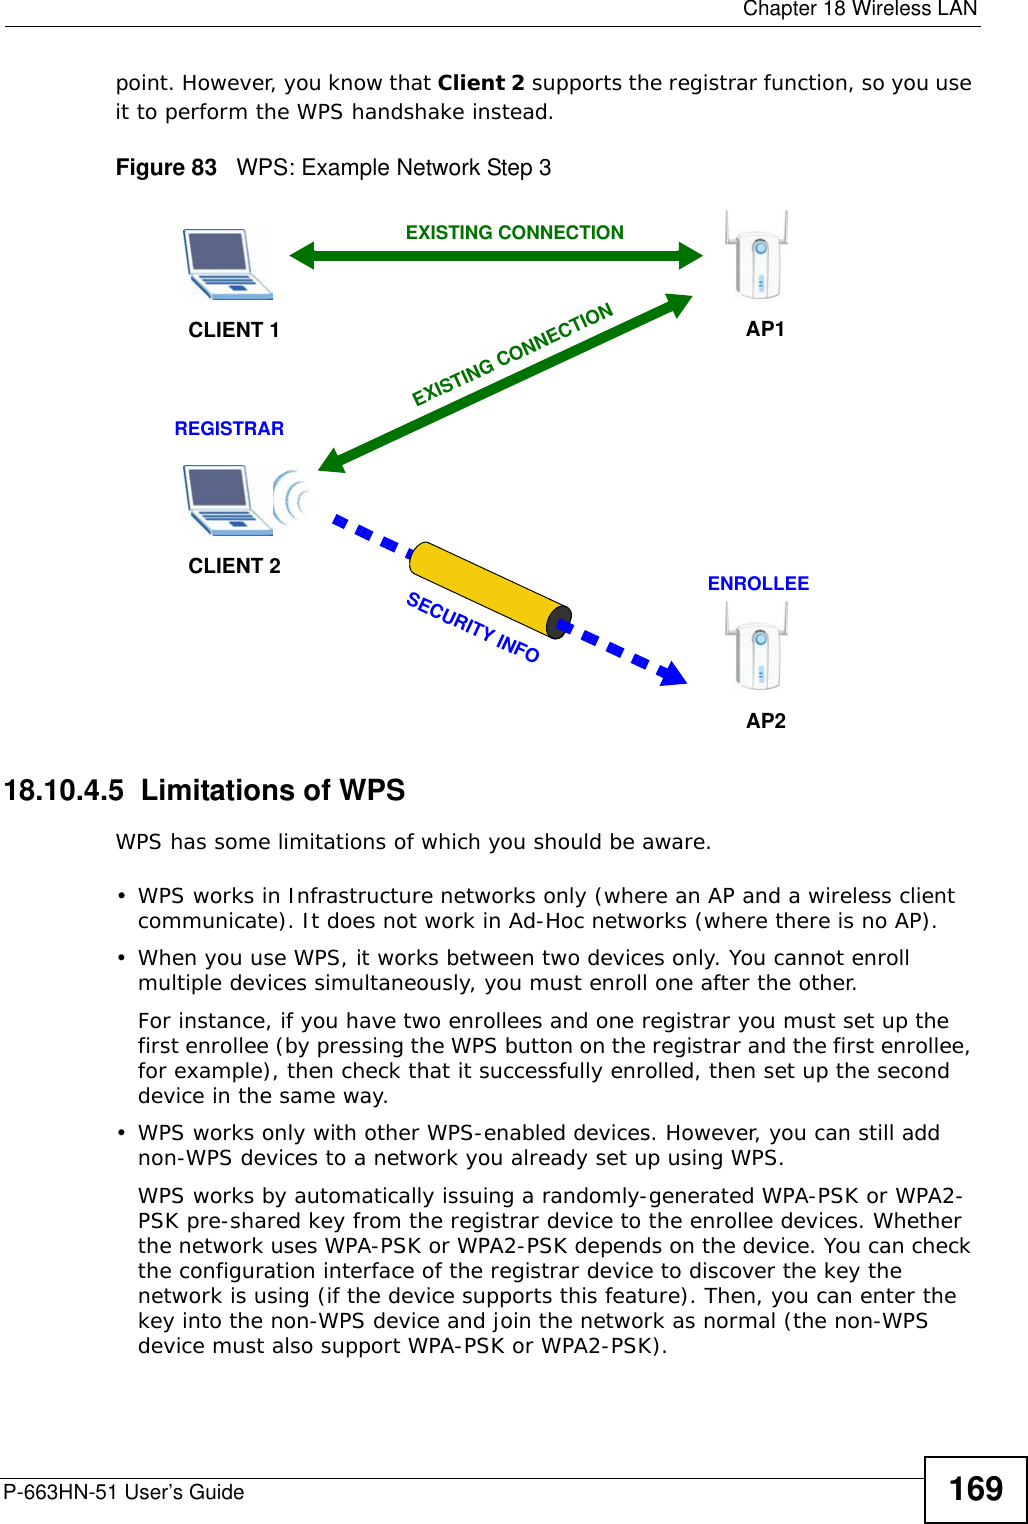  Chapter 18 Wireless LANP-663HN-51 User’s Guide 169point. However, you know that Client 2 supports the registrar function, so you use it to perform the WPS handshake instead.Figure 83   WPS: Example Network Step 318.10.4.5  Limitations of WPSWPS has some limitations of which you should be aware. • WPS works in Infrastructure networks only (where an AP and a wireless client communicate). It does not work in Ad-Hoc networks (where there is no AP).• When you use WPS, it works between two devices only. You cannot enroll multiple devices simultaneously, you must enroll one after the other. For instance, if you have two enrollees and one registrar you must set up the first enrollee (by pressing the WPS button on the registrar and the first enrollee, for example), then check that it successfully enrolled, then set up the second device in the same way.• WPS works only with other WPS-enabled devices. However, you can still add non-WPS devices to a network you already set up using WPS. WPS works by automatically issuing a randomly-generated WPA-PSK or WPA2-PSK pre-shared key from the registrar device to the enrollee devices. Whether the network uses WPA-PSK or WPA2-PSK depends on the device. You can check the configuration interface of the registrar device to discover the key the network is using (if the device supports this feature). Then, you can enter the key into the non-WPS device and join the network as normal (the non-WPS device must also support WPA-PSK or WPA2-PSK).CLIENT 1 AP1REGISTRARCLIENT 2EXISTING CONNECTIONSECURITY INFOENROLLEEAP2EXISTING CONNECTION